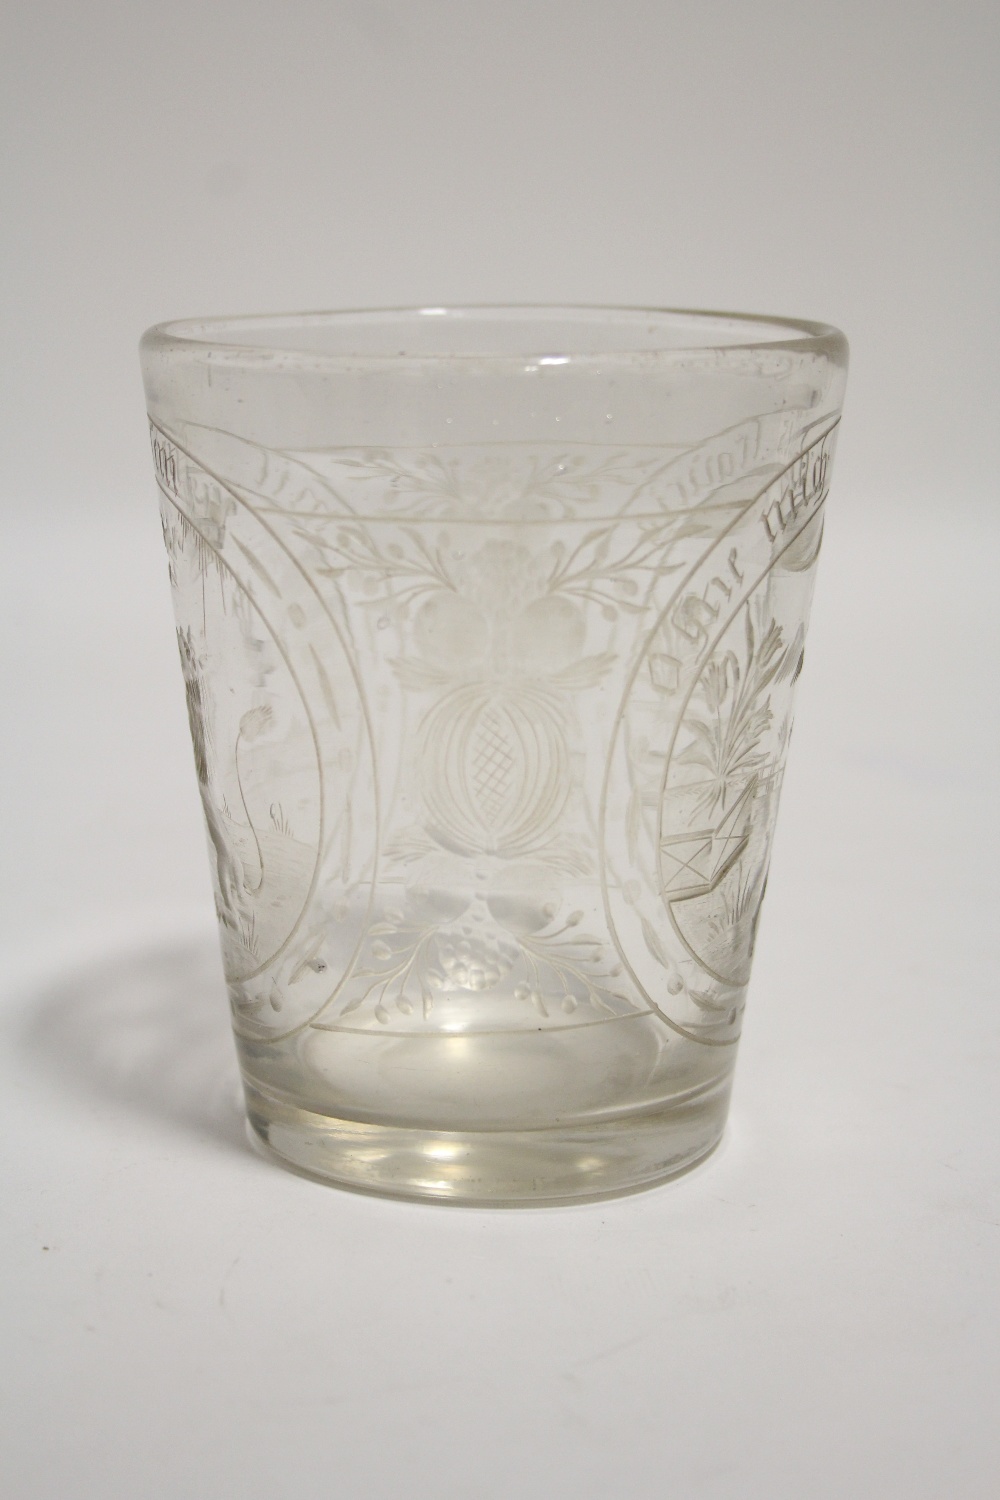 AN 18th Century GERMAN GLASS FUNNEL-SHAPED BEAKER with intaglio engraved heraldic device to one side - Image 5 of 10